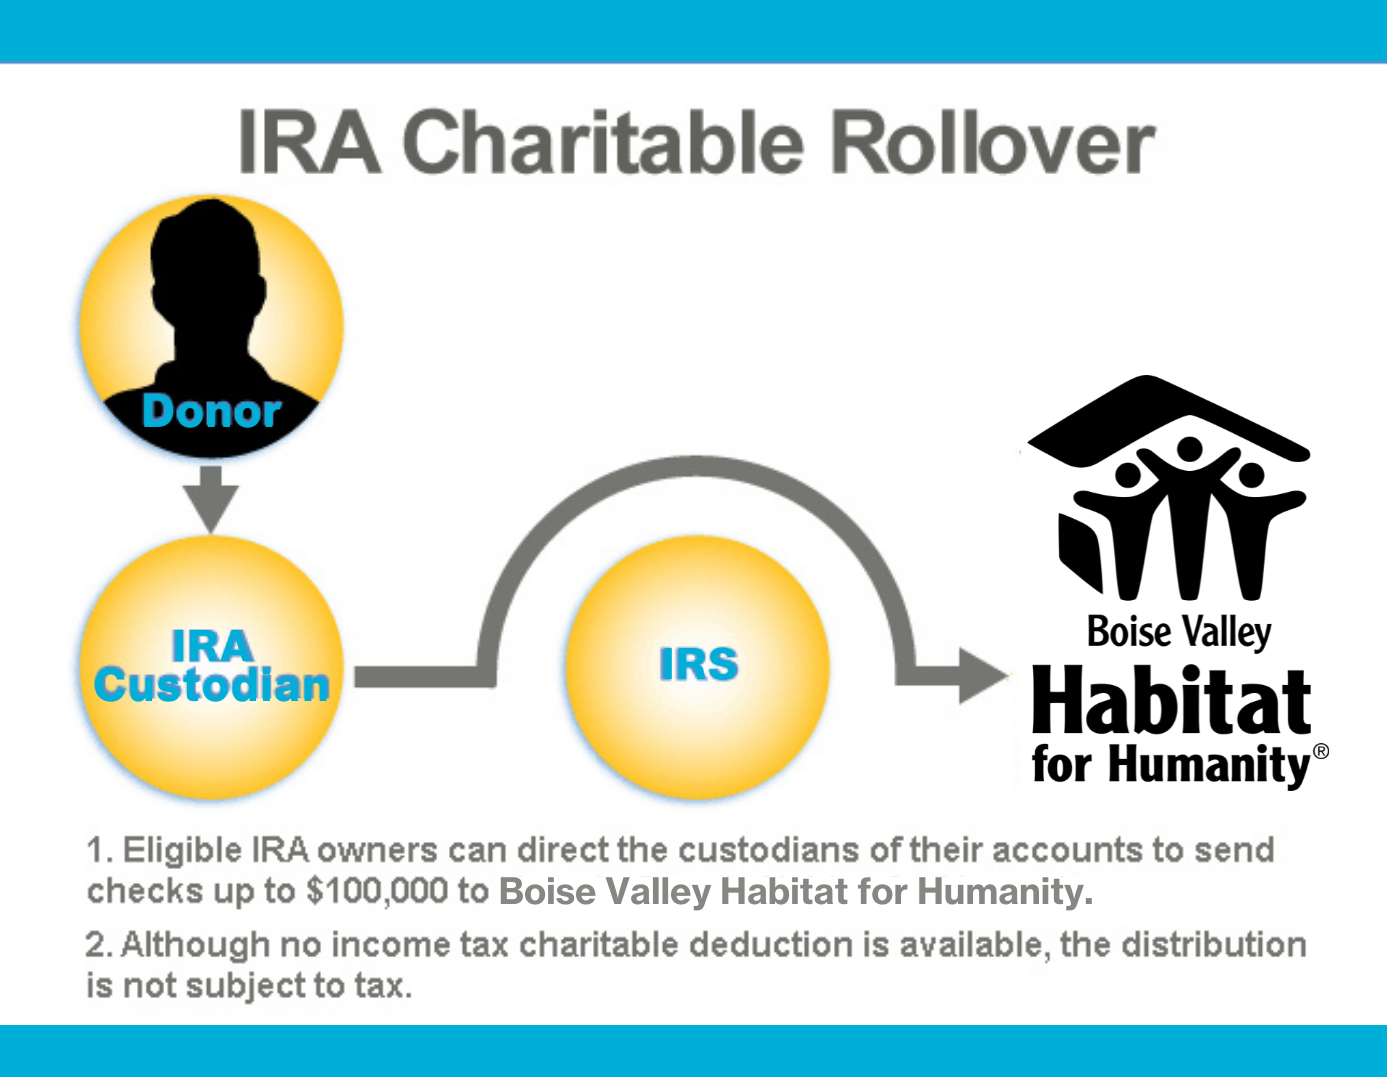 A graphic explaining the IRA Charitable Rollover